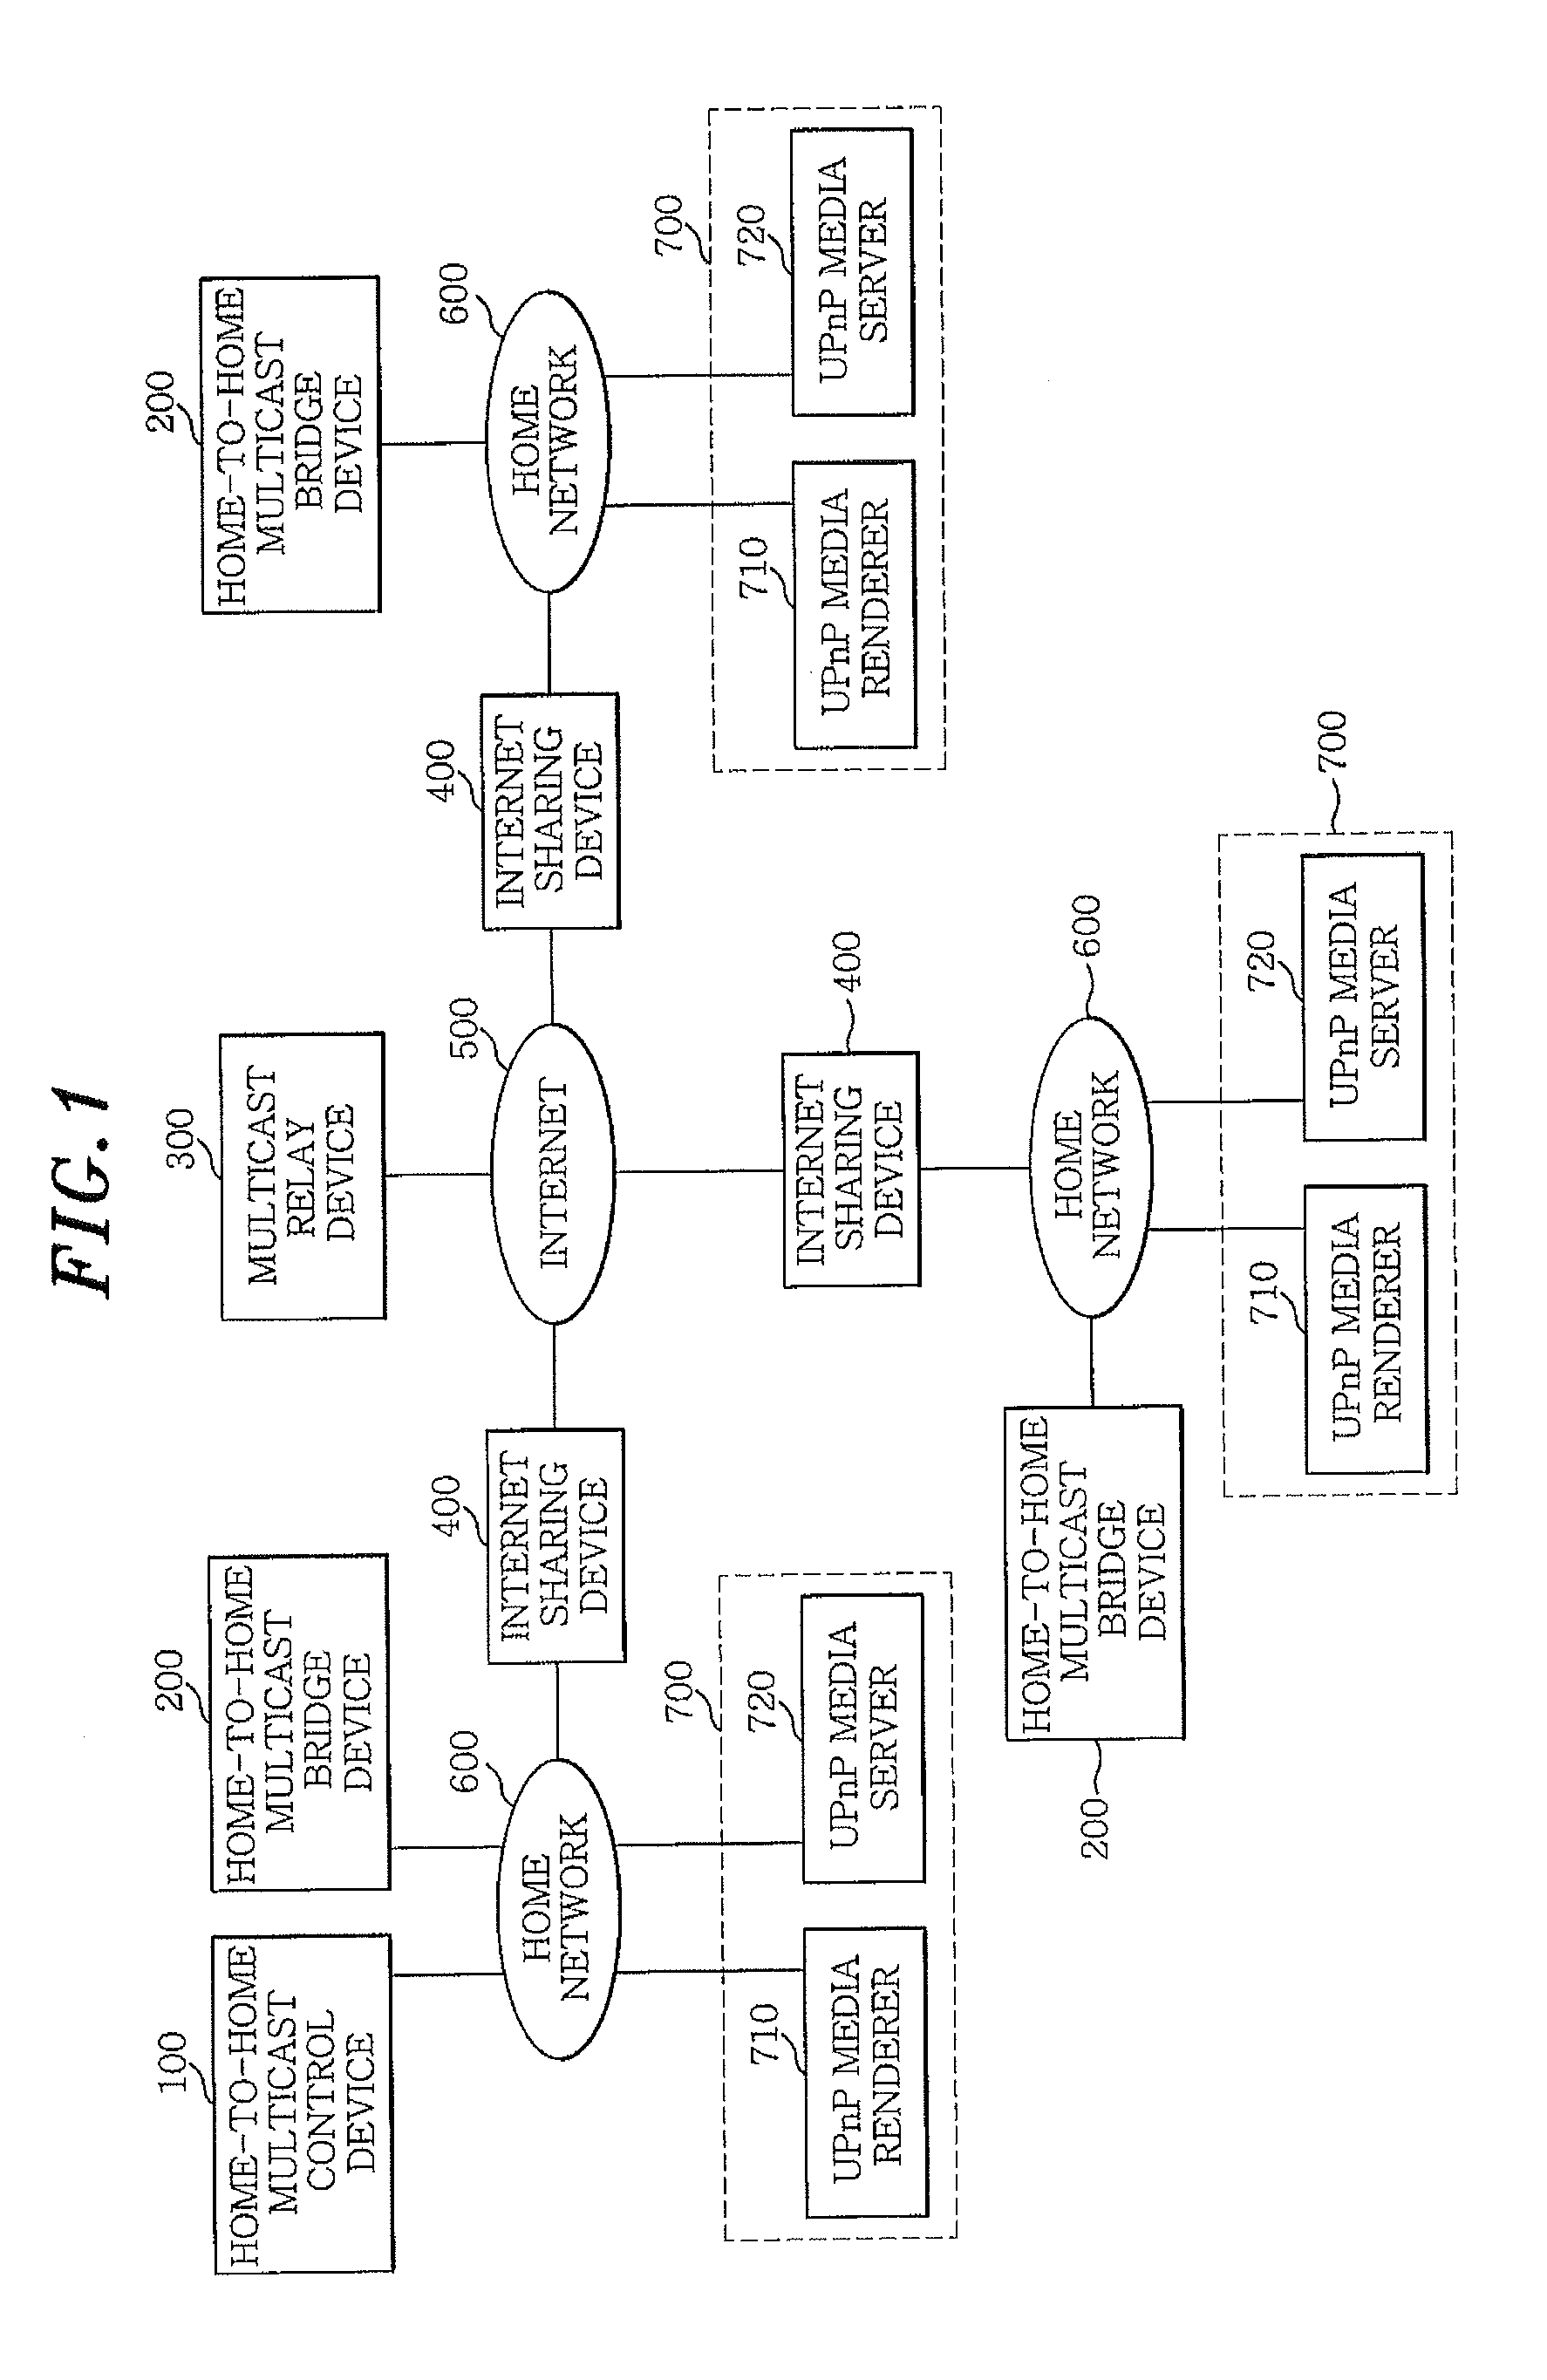 Method and apparatus for multicasting contents between devices in networks